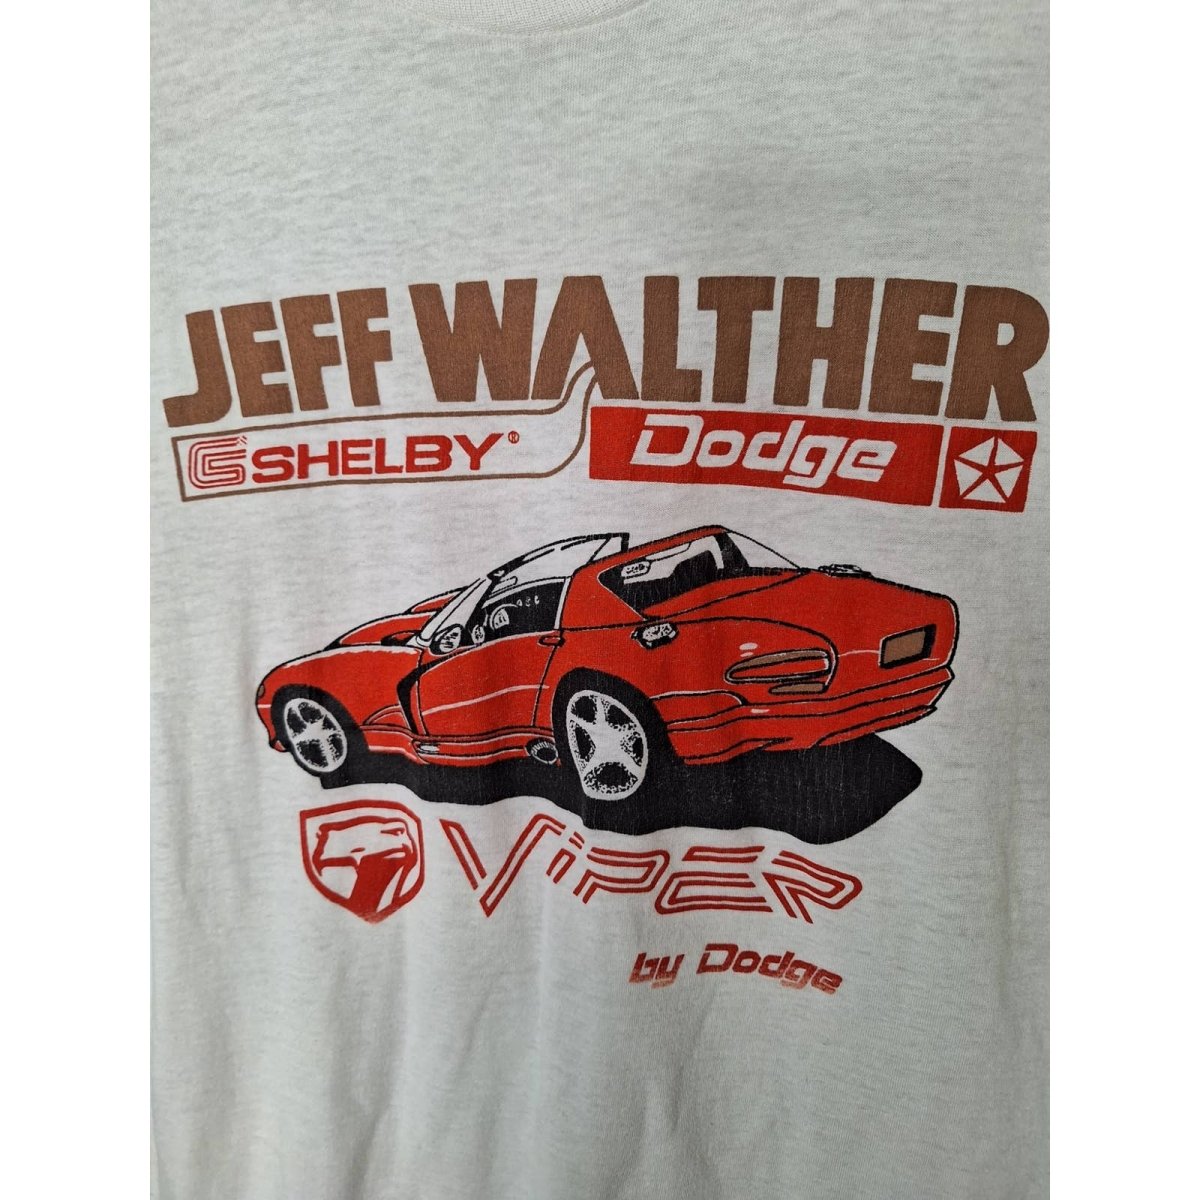 90s Ultra Thin Dodge Viper Tee Size Large - themallvintage The Mall Vintage